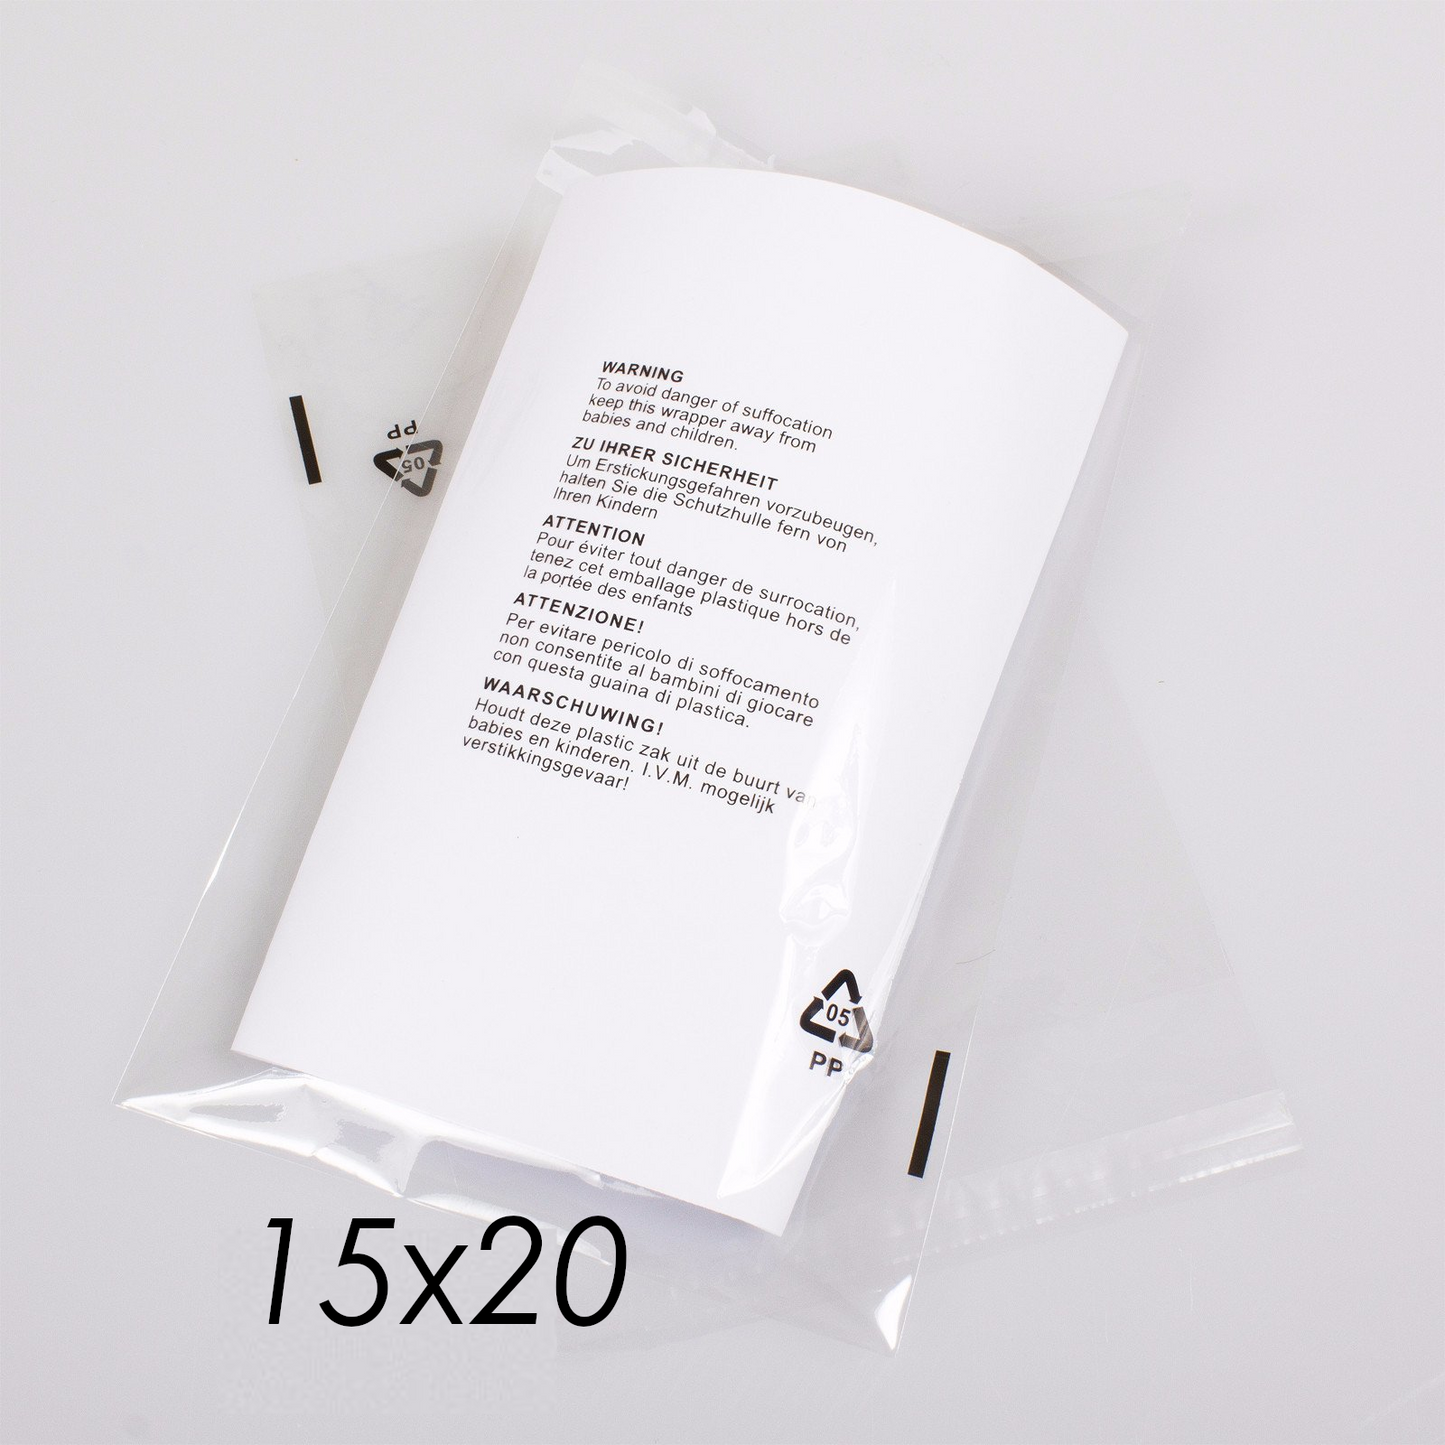 15X20" CPP Transparent Packaging Bag with Warning Labels Printed,SR Mailing,